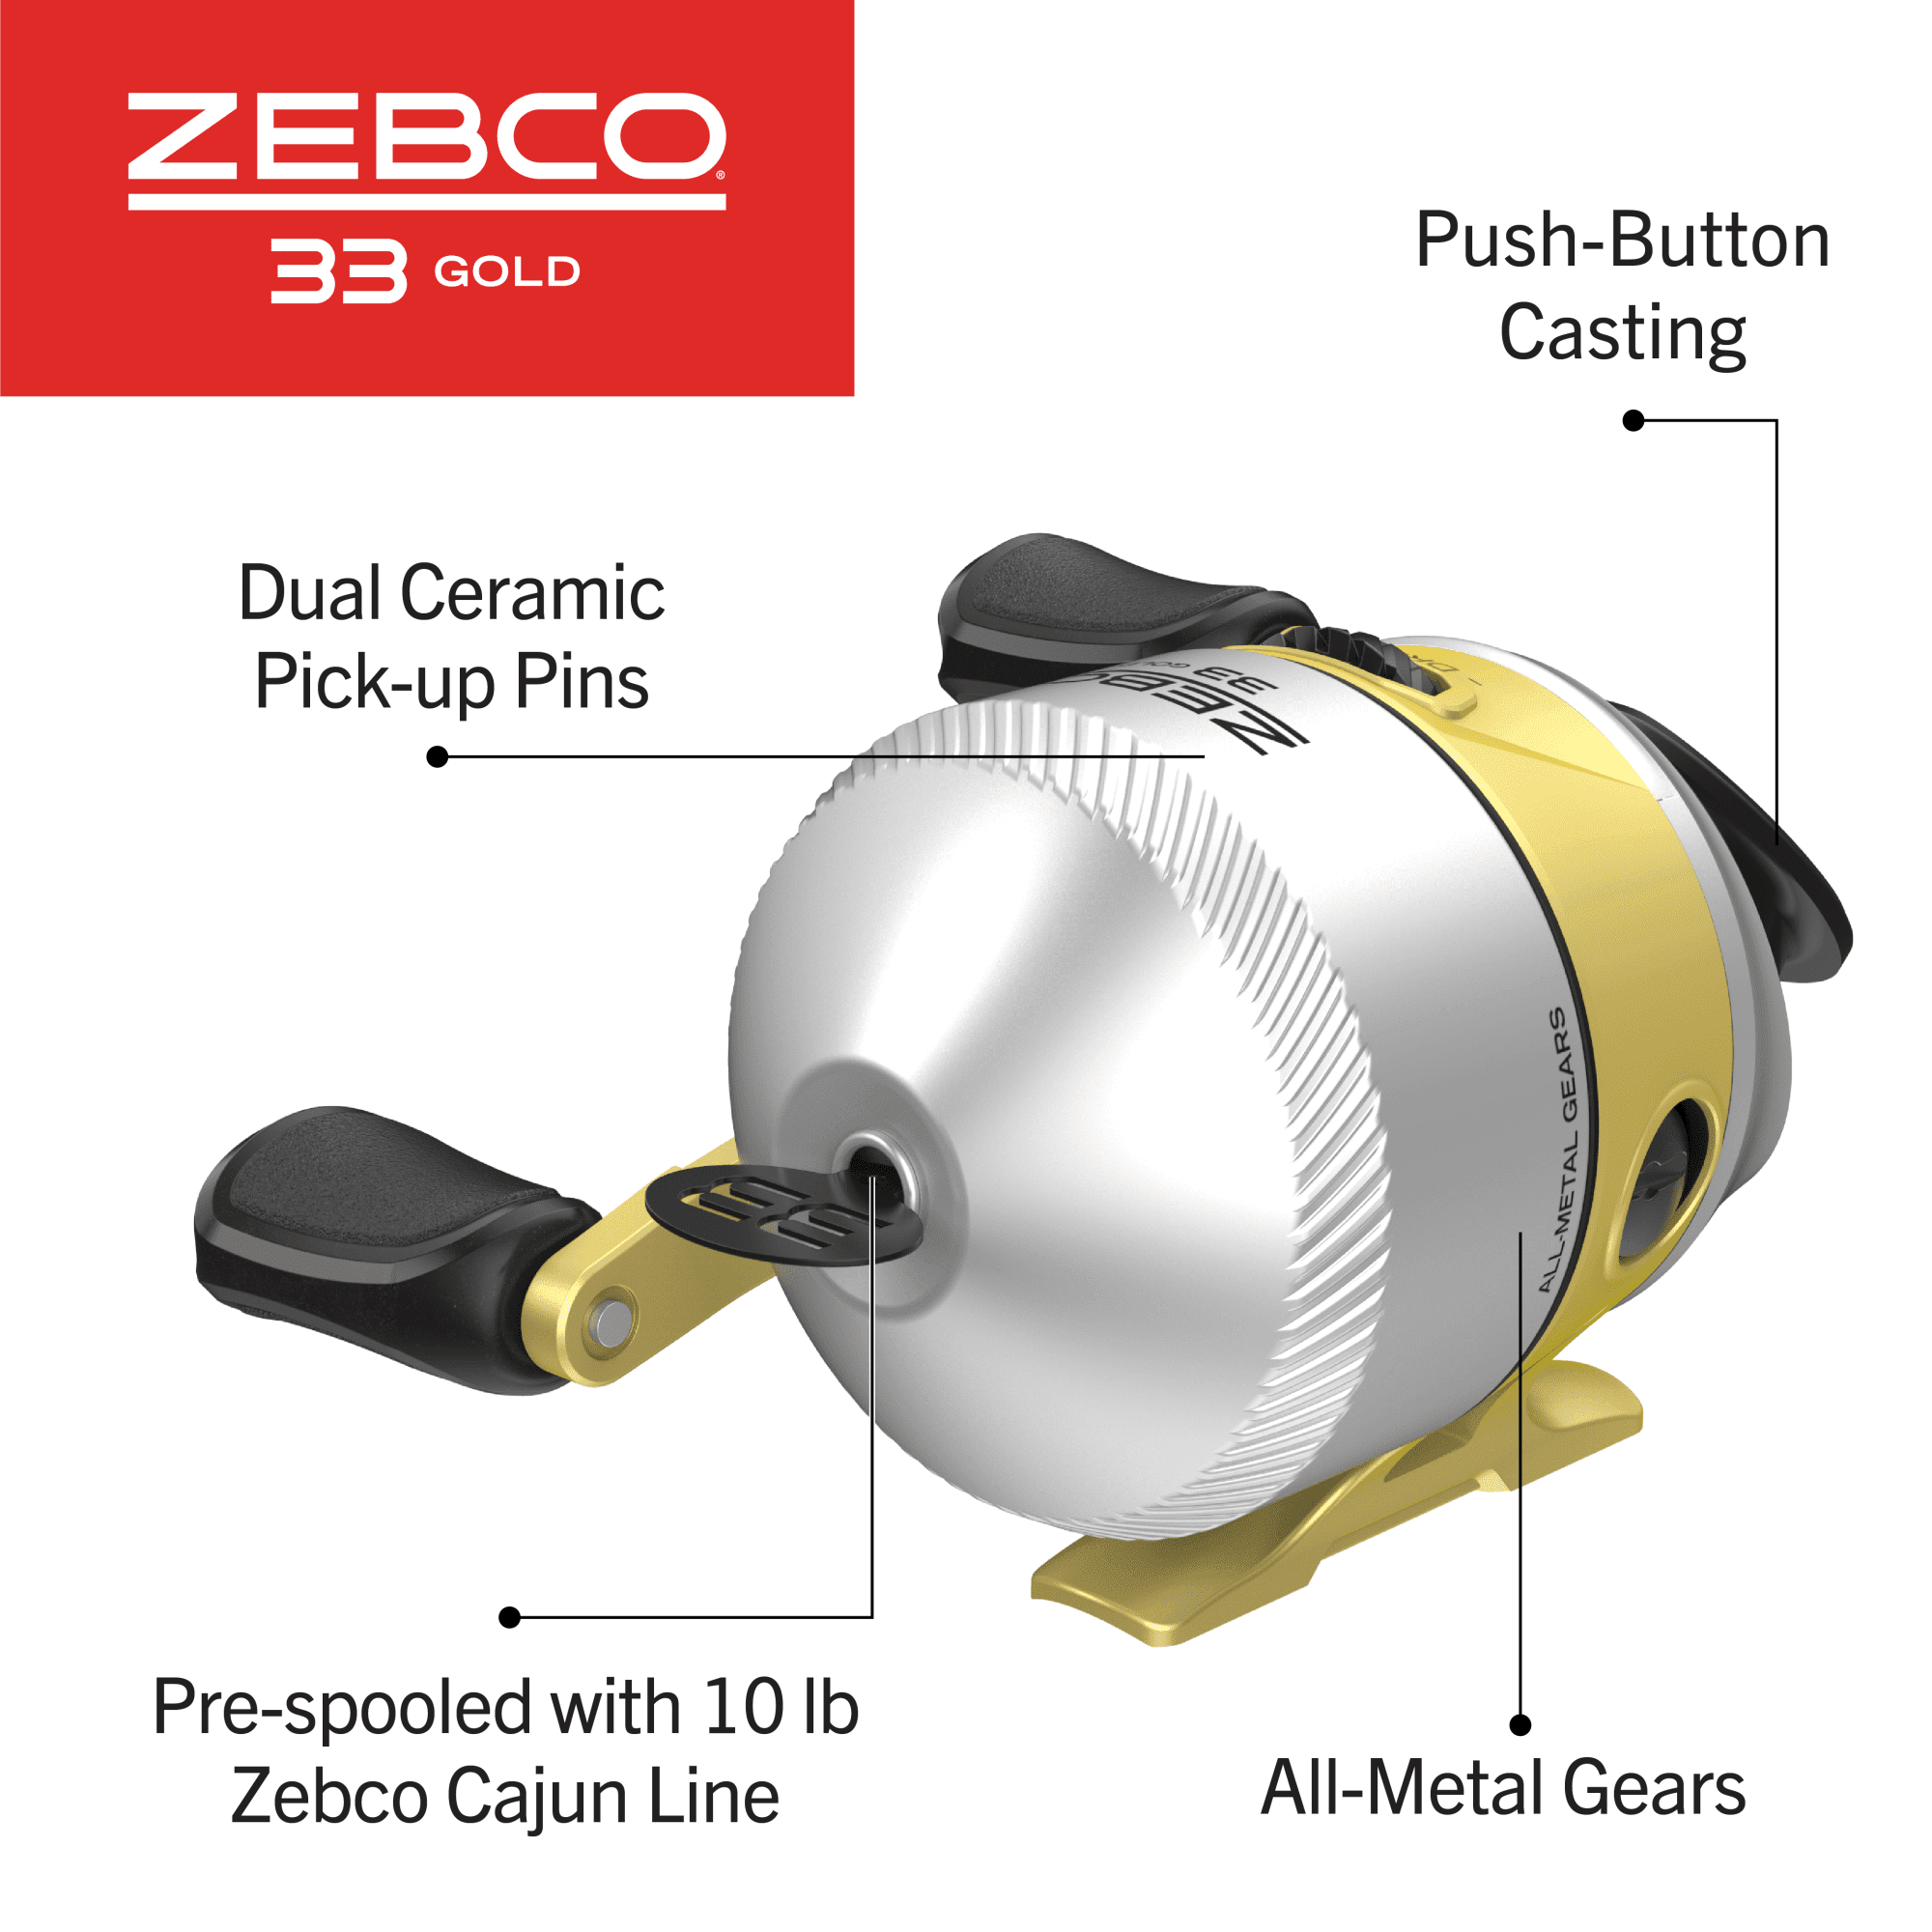 Zebco 33 Gold Micro Triggerspin Combo